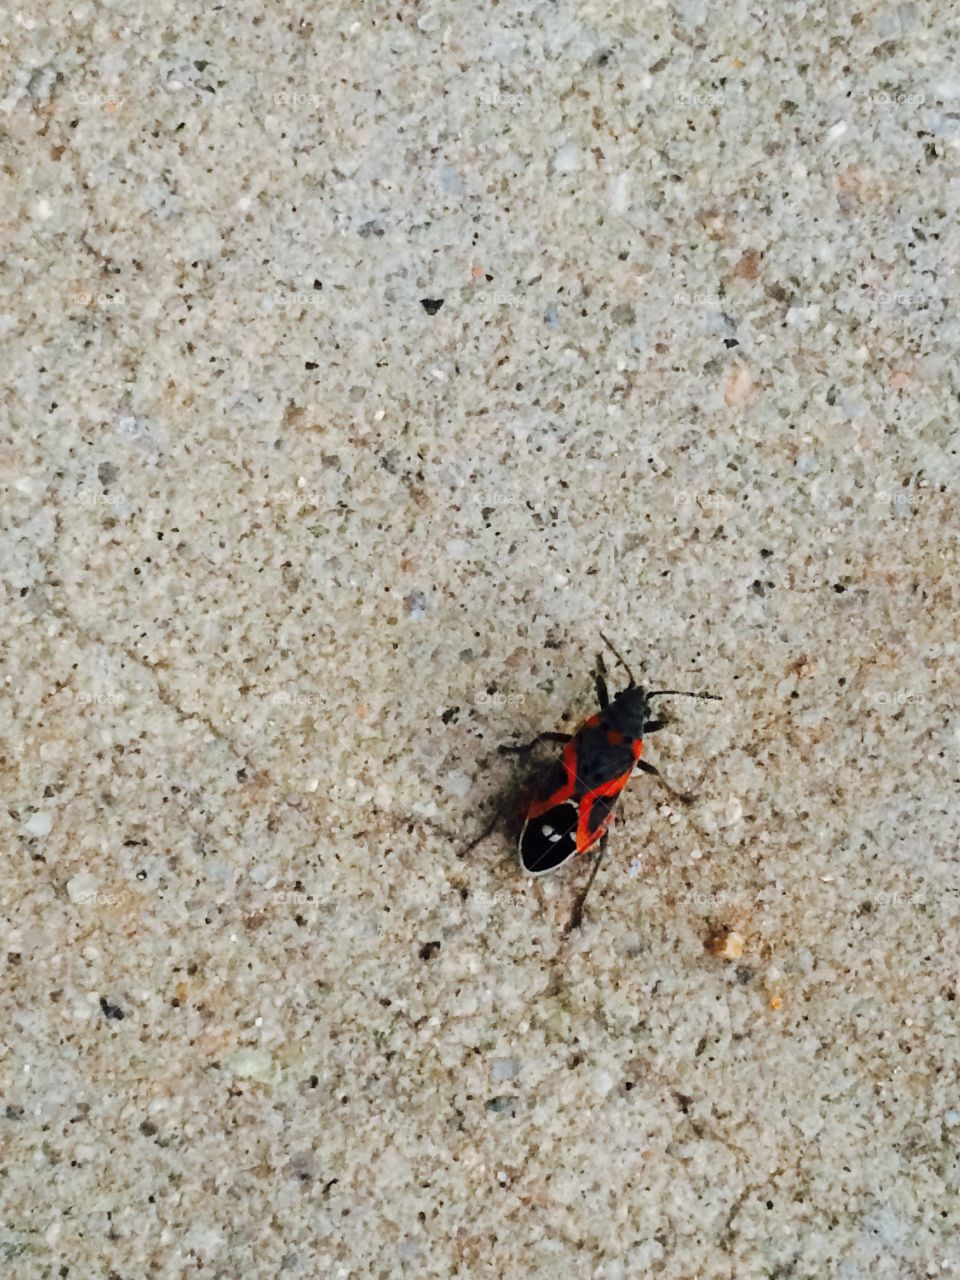 Black and red bug